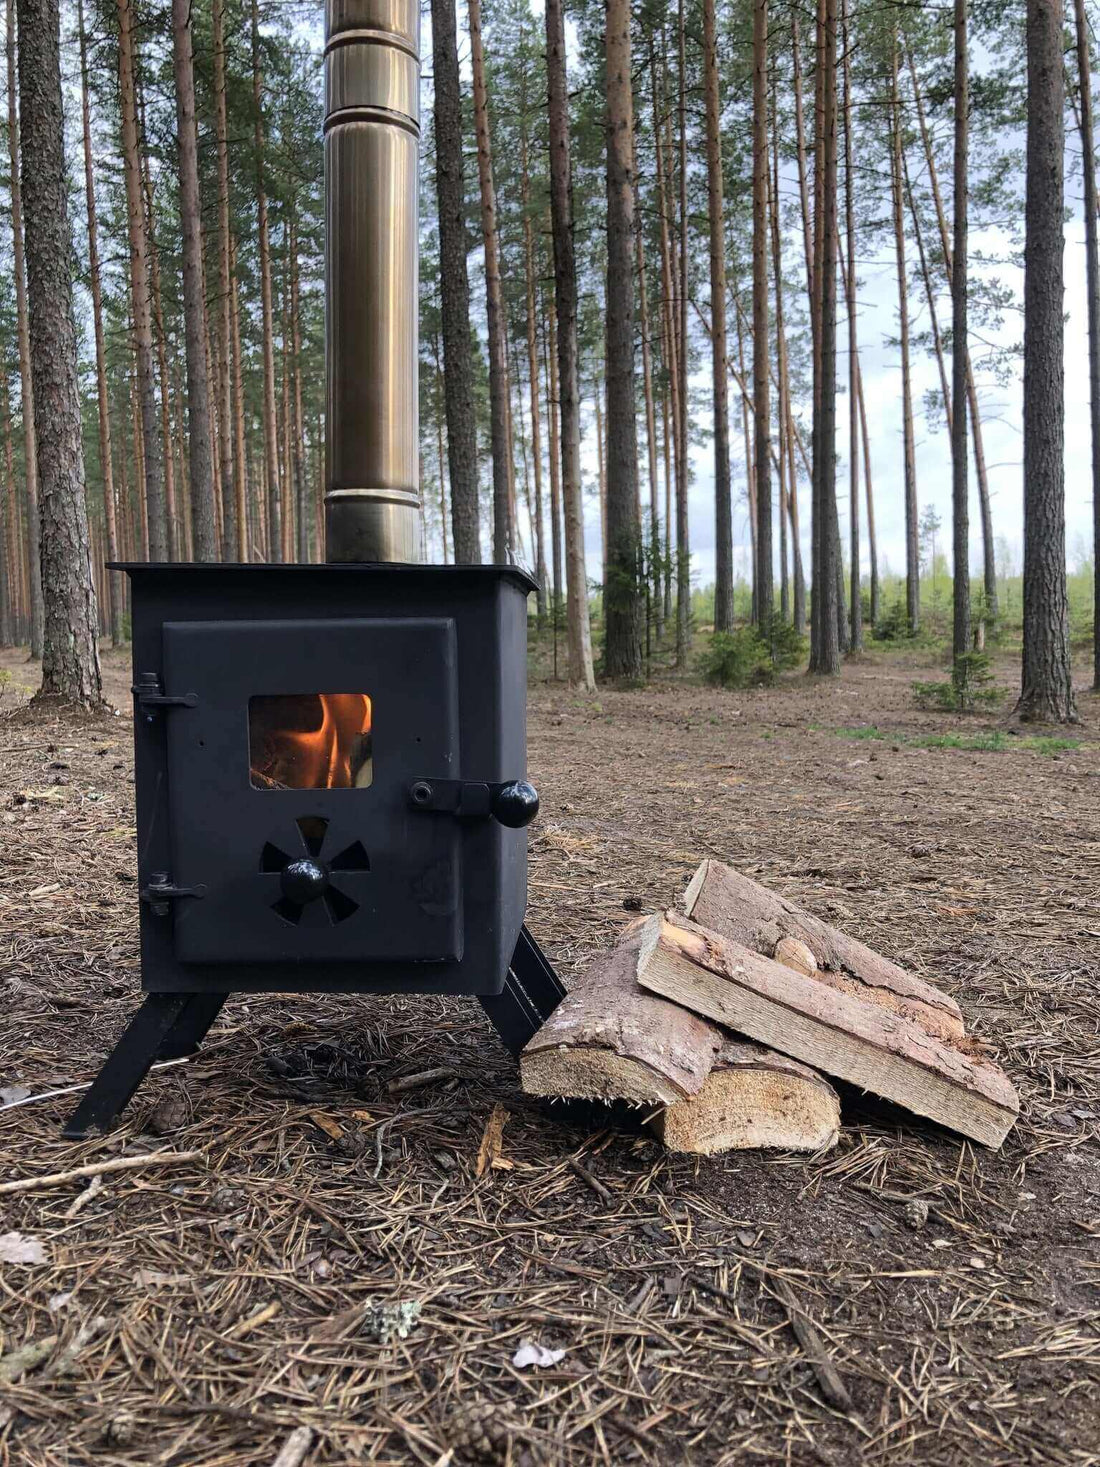 History of wood burning stoves, when were wood stoves invented?